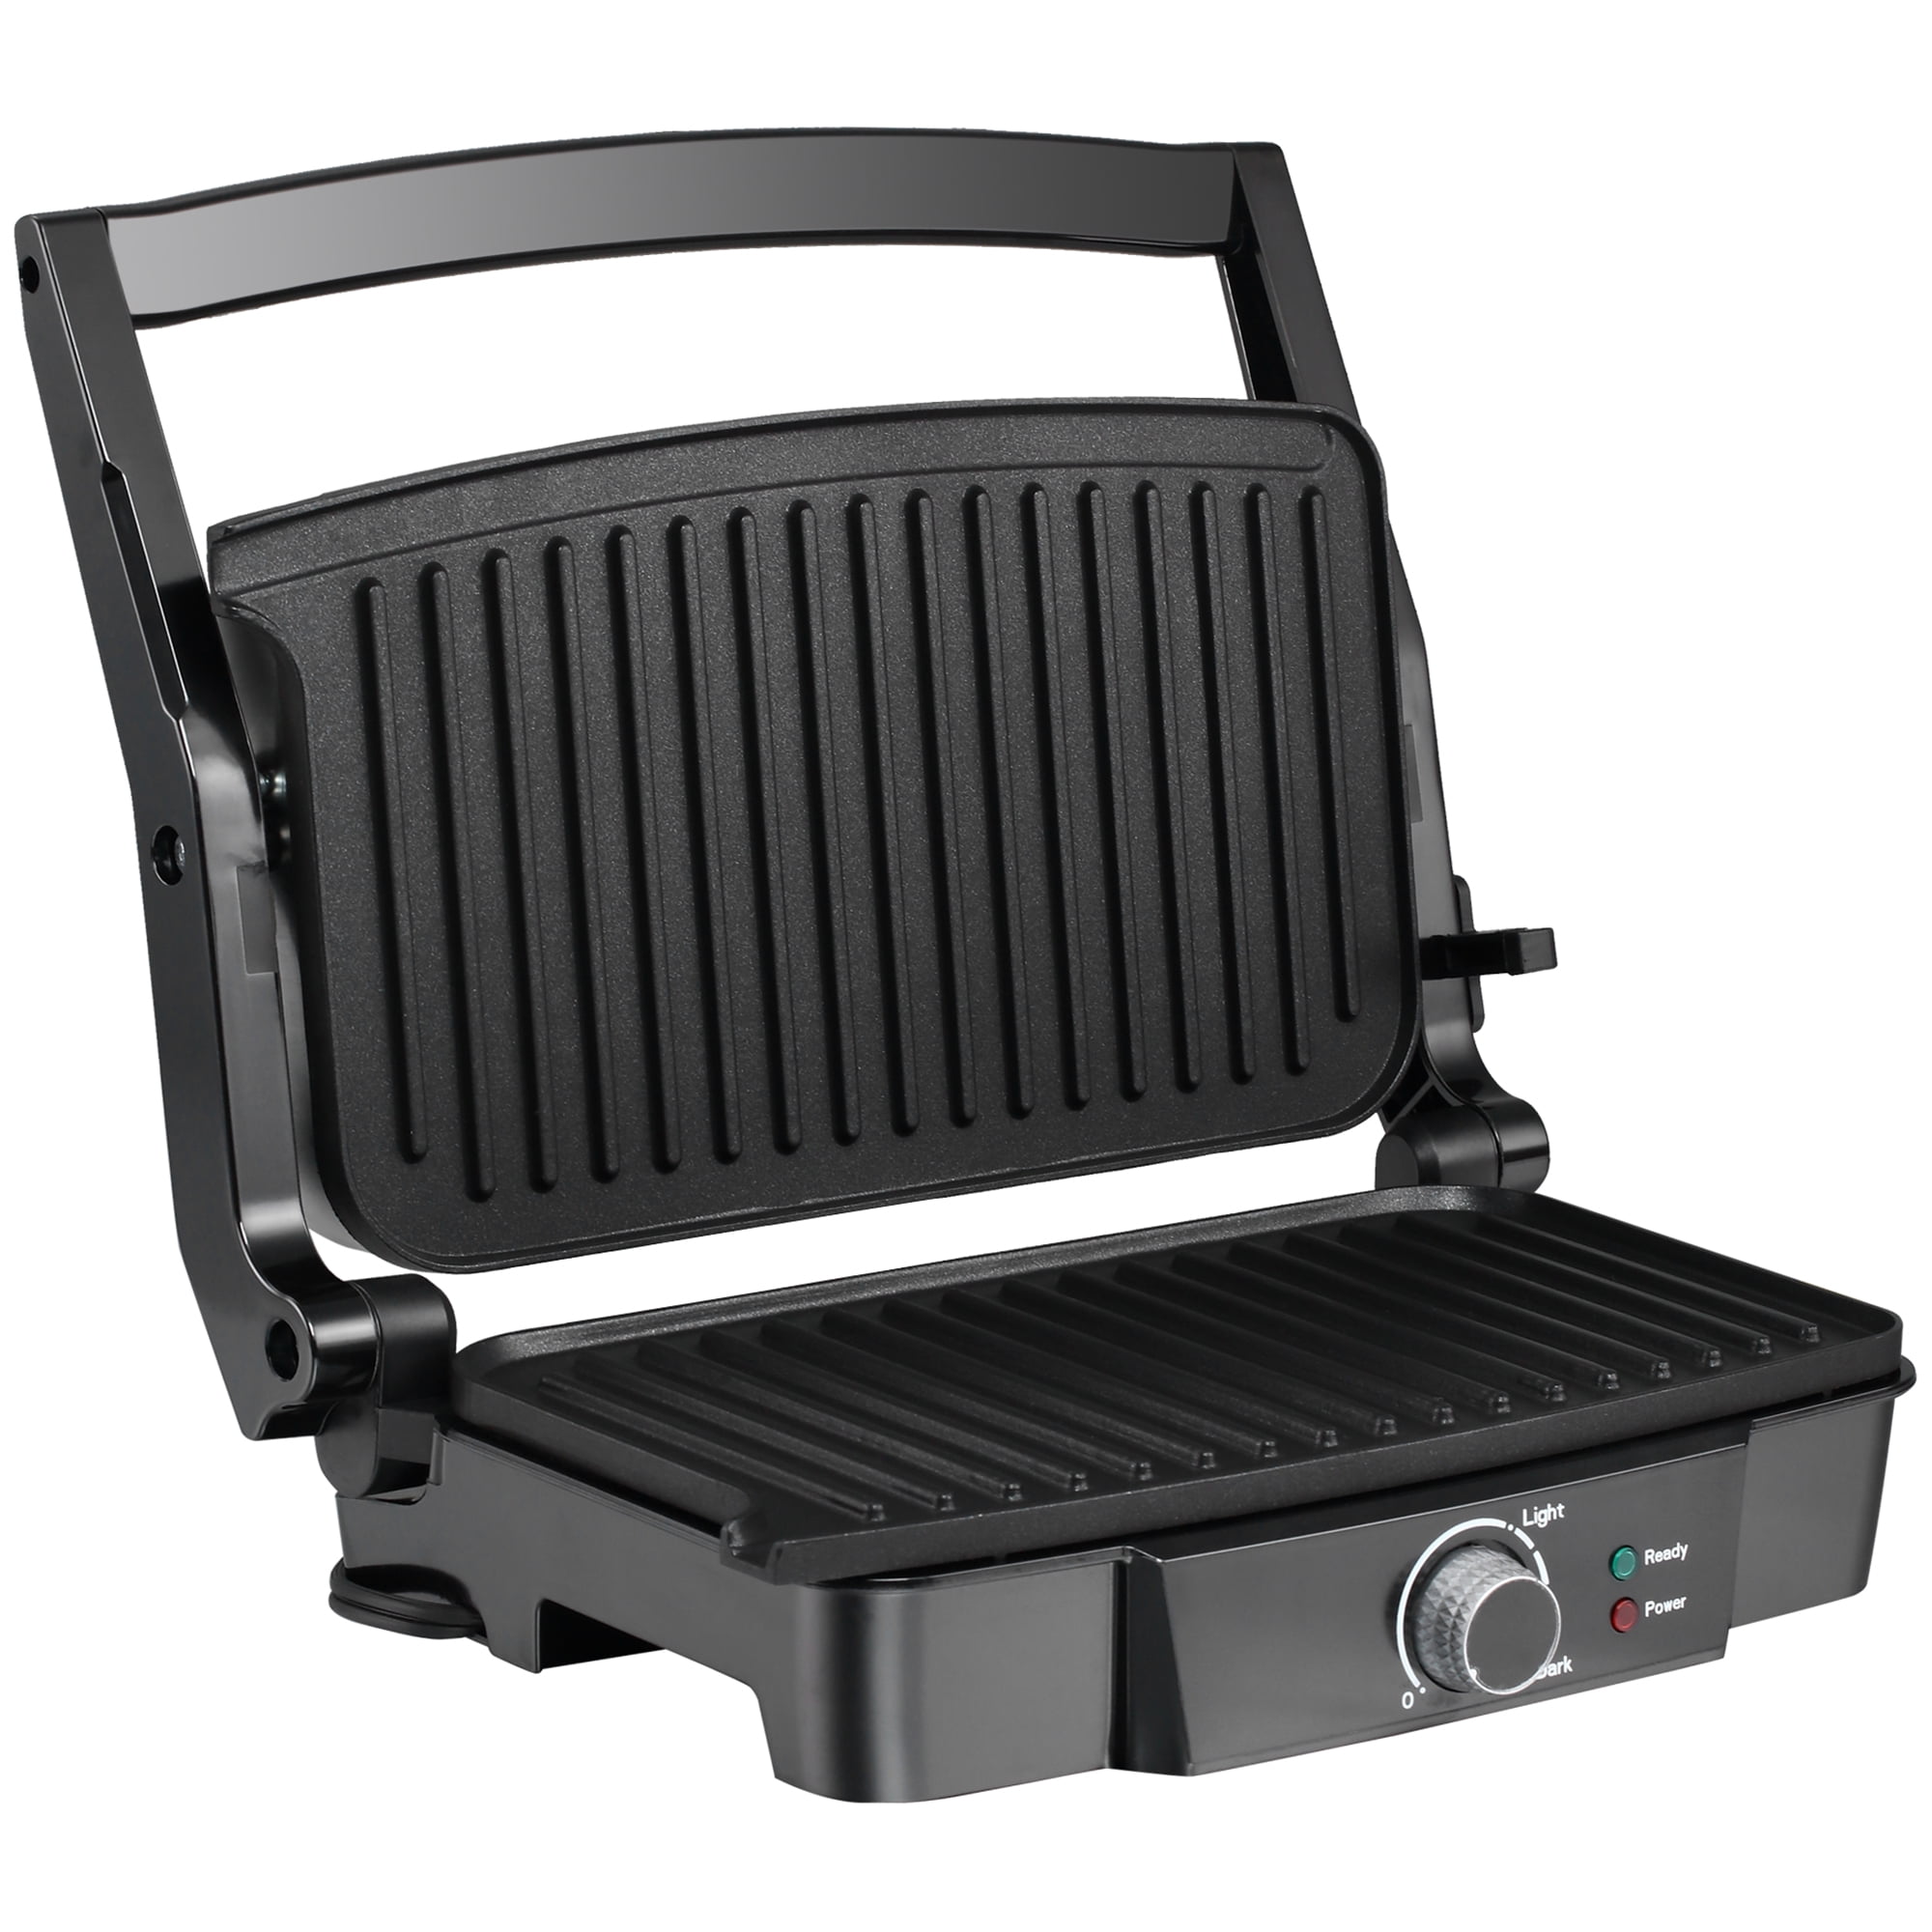 3 in 1 Indoor Electric Panini Press Grill with LED Display-Black | Costway